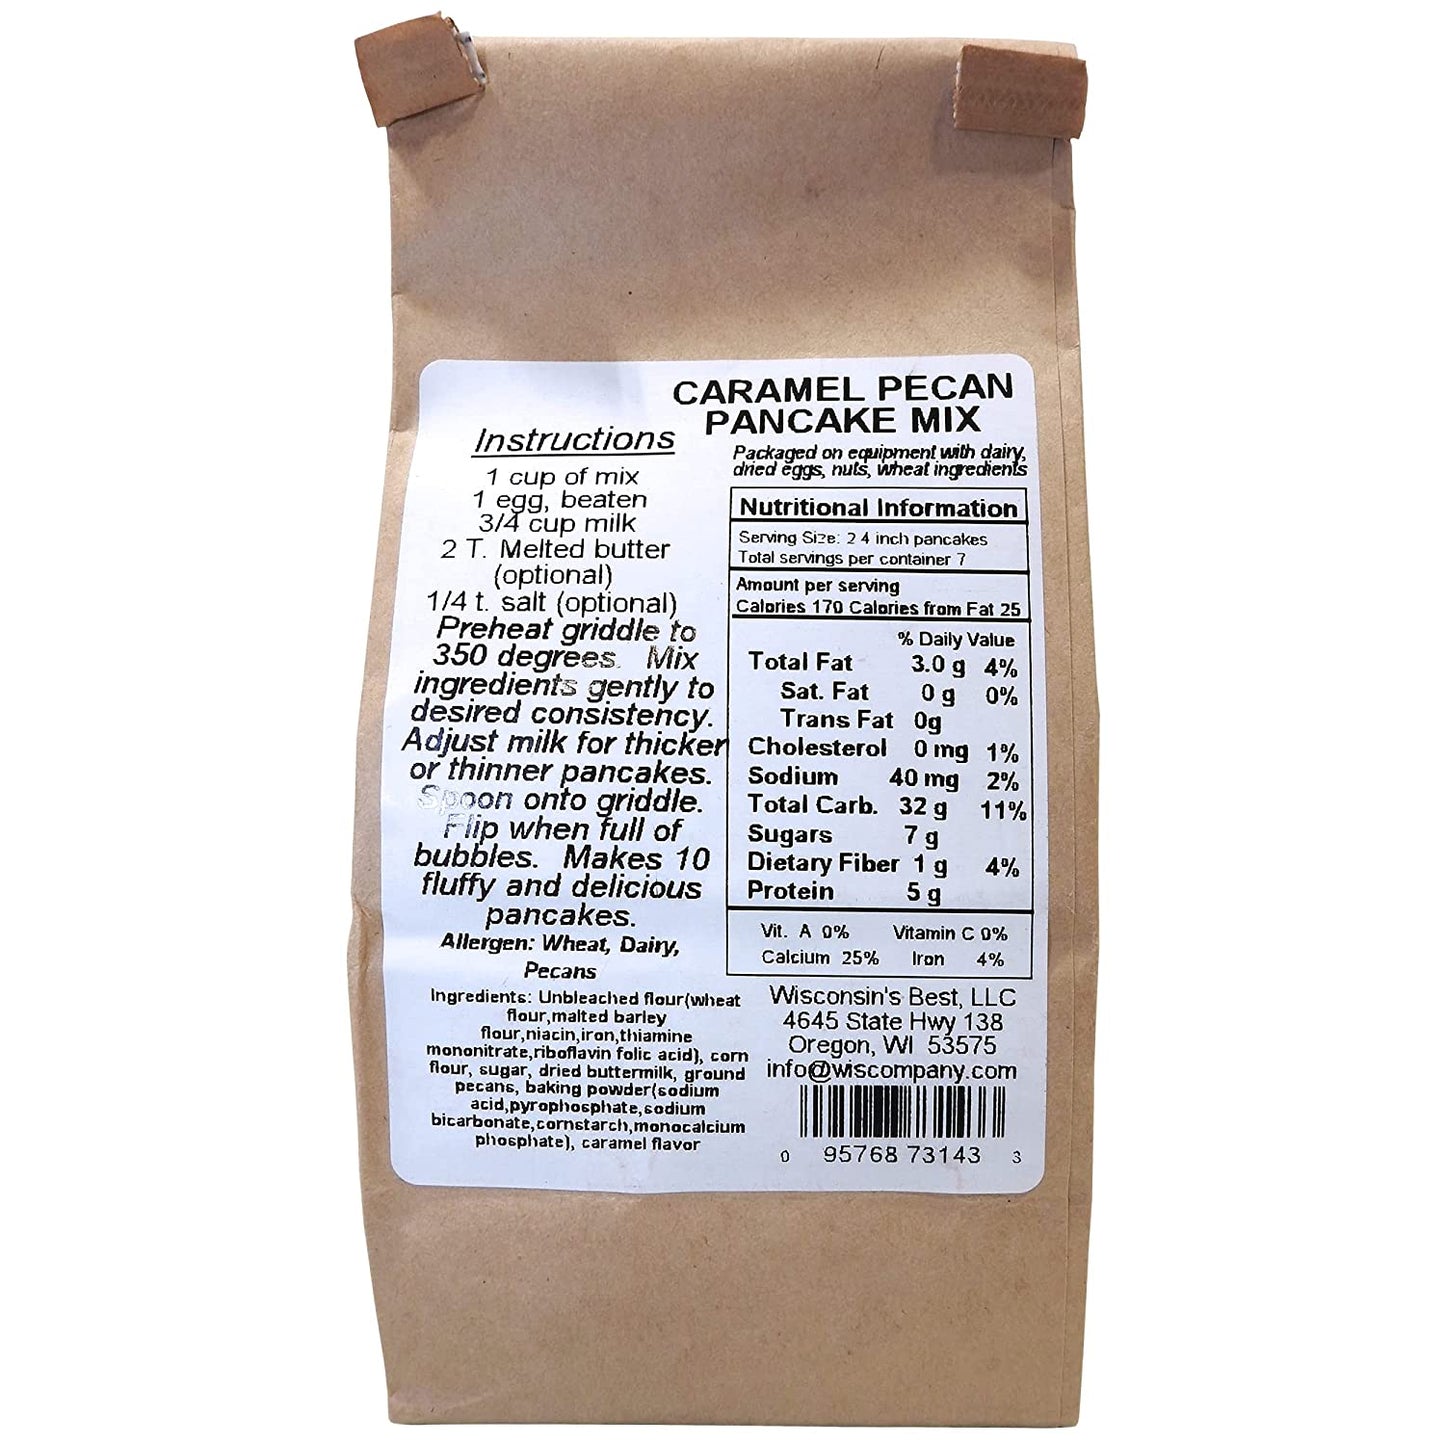 Wisconsin's Best Caramel Pecan Pancake Mix, 12 oz. (Pack of 2) A Great Gift for Mother's Day!